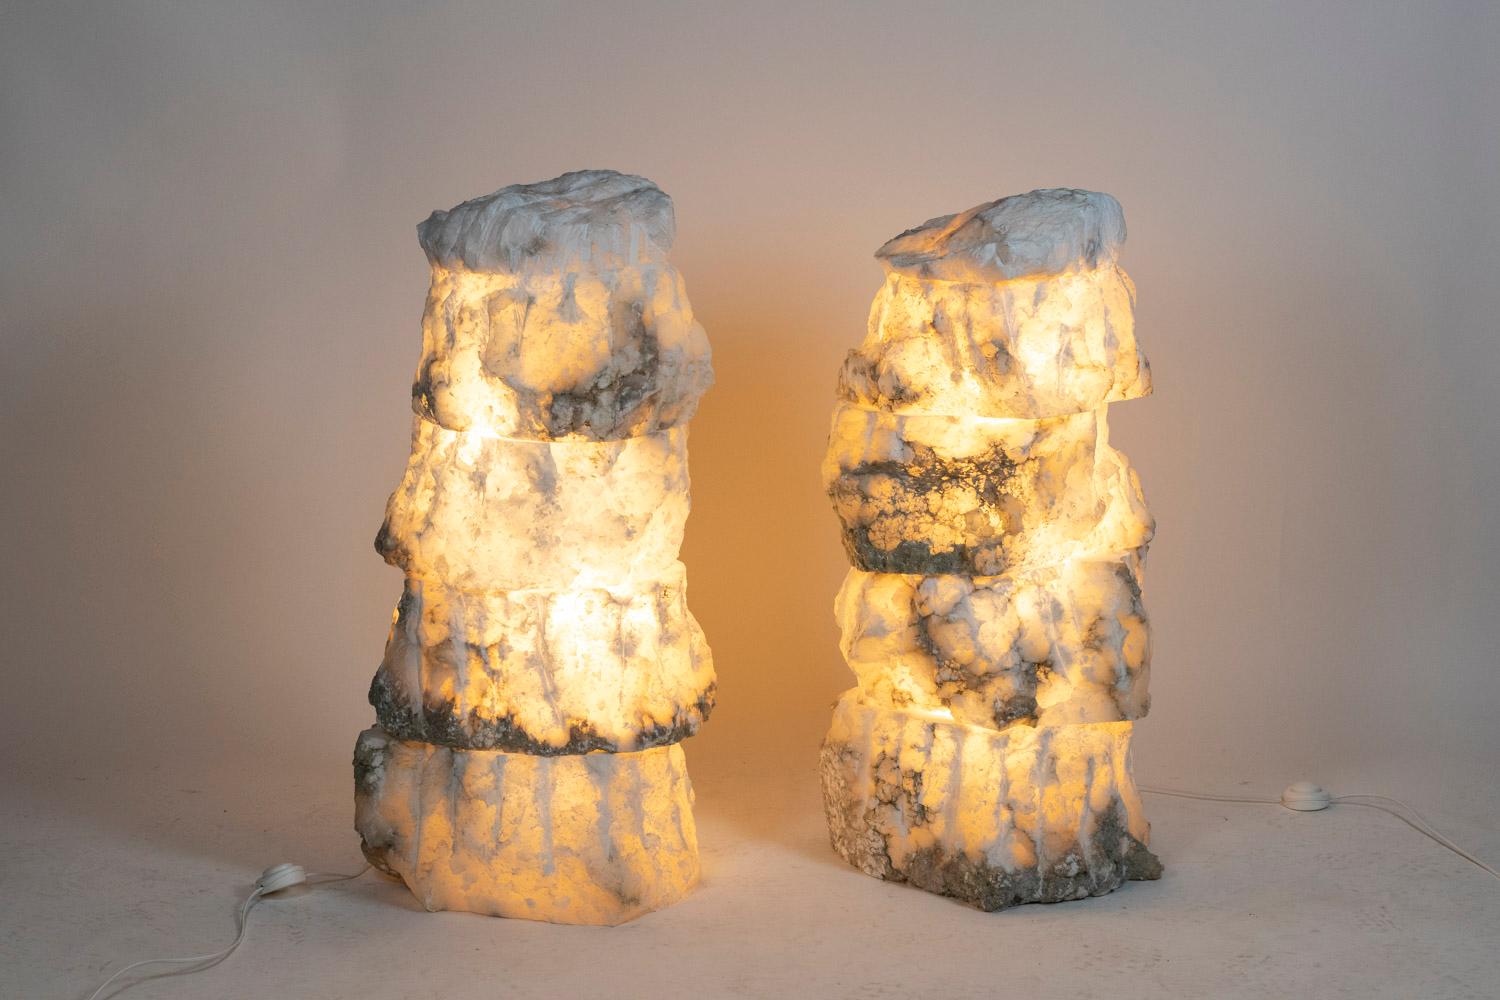 Pair of large lamps in alabaster, uncut, made up of four juxtaposed blocks.

Contemporary Italian craftsmanship.

The price is indicated for a pair!.